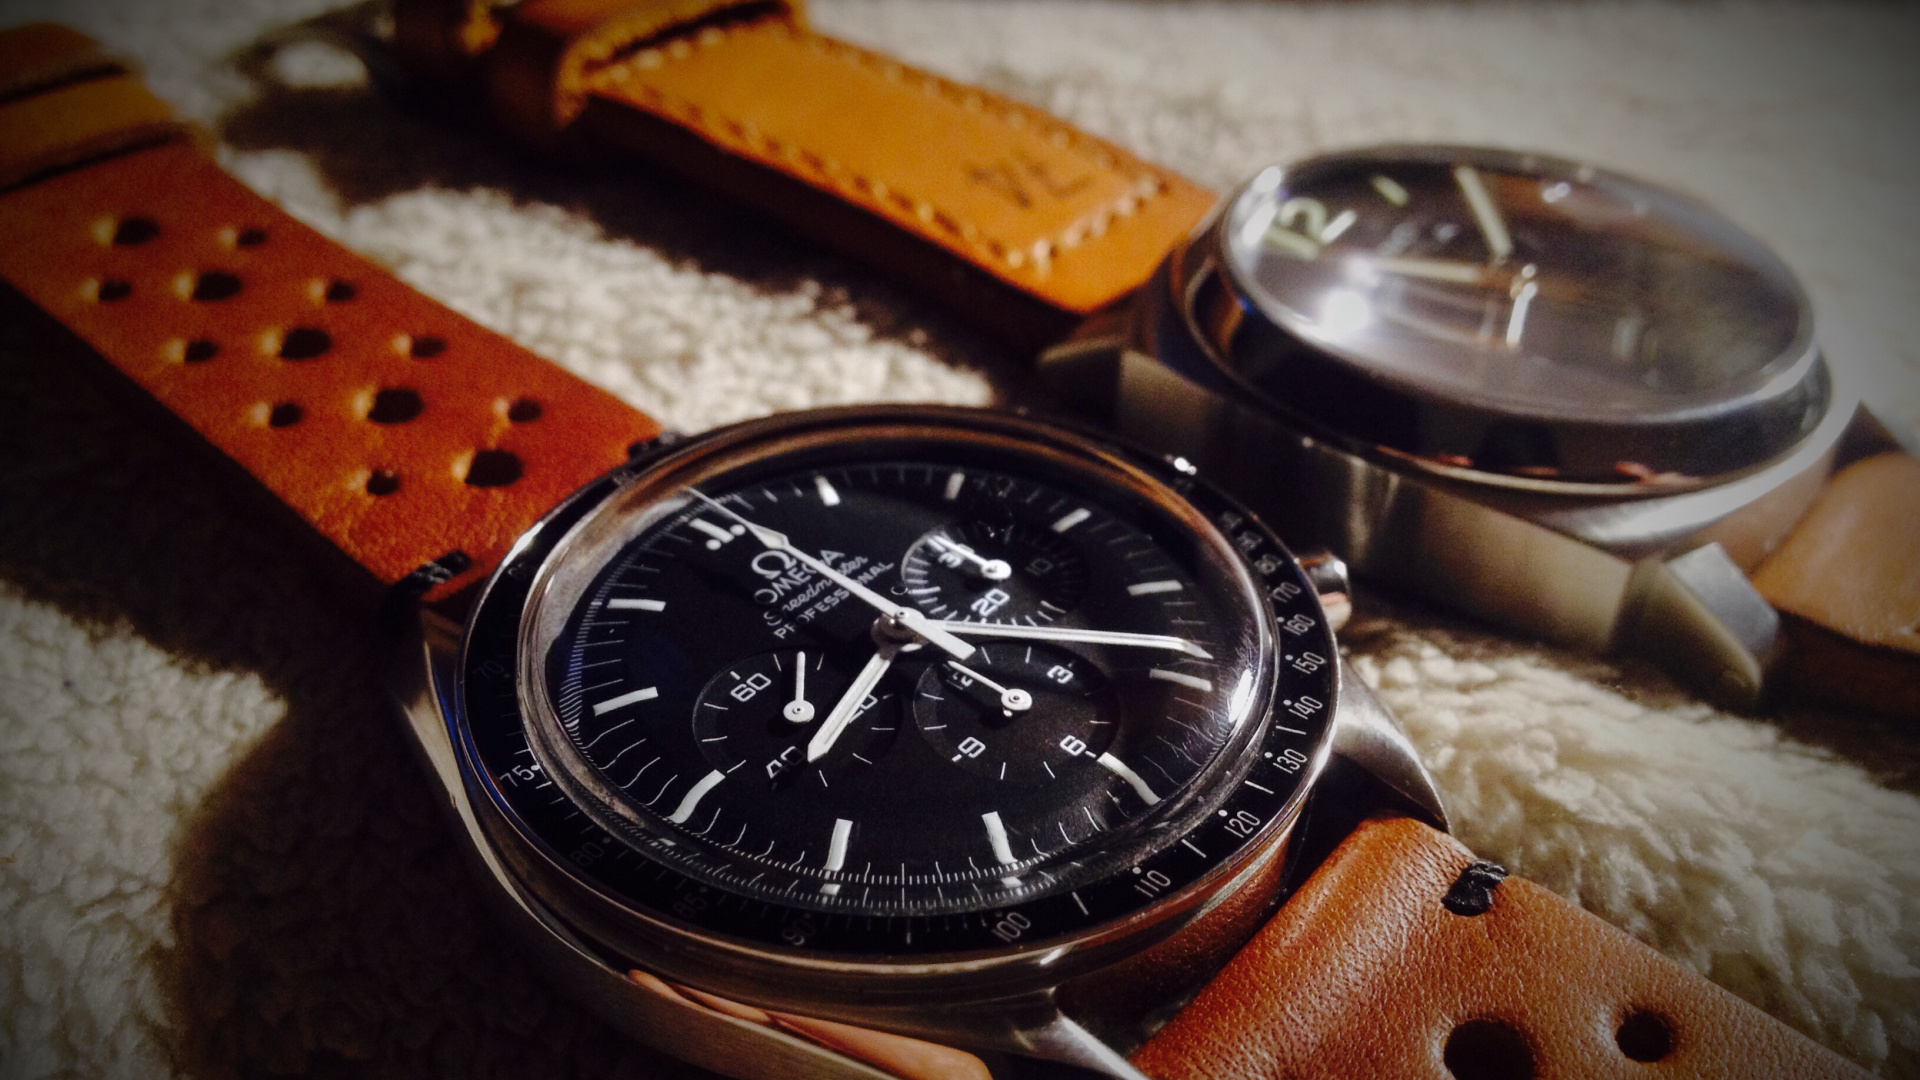 Brown Leather Strap Silver Round Chronograph Watch. Wallpaper in 1920x1080 Resolution